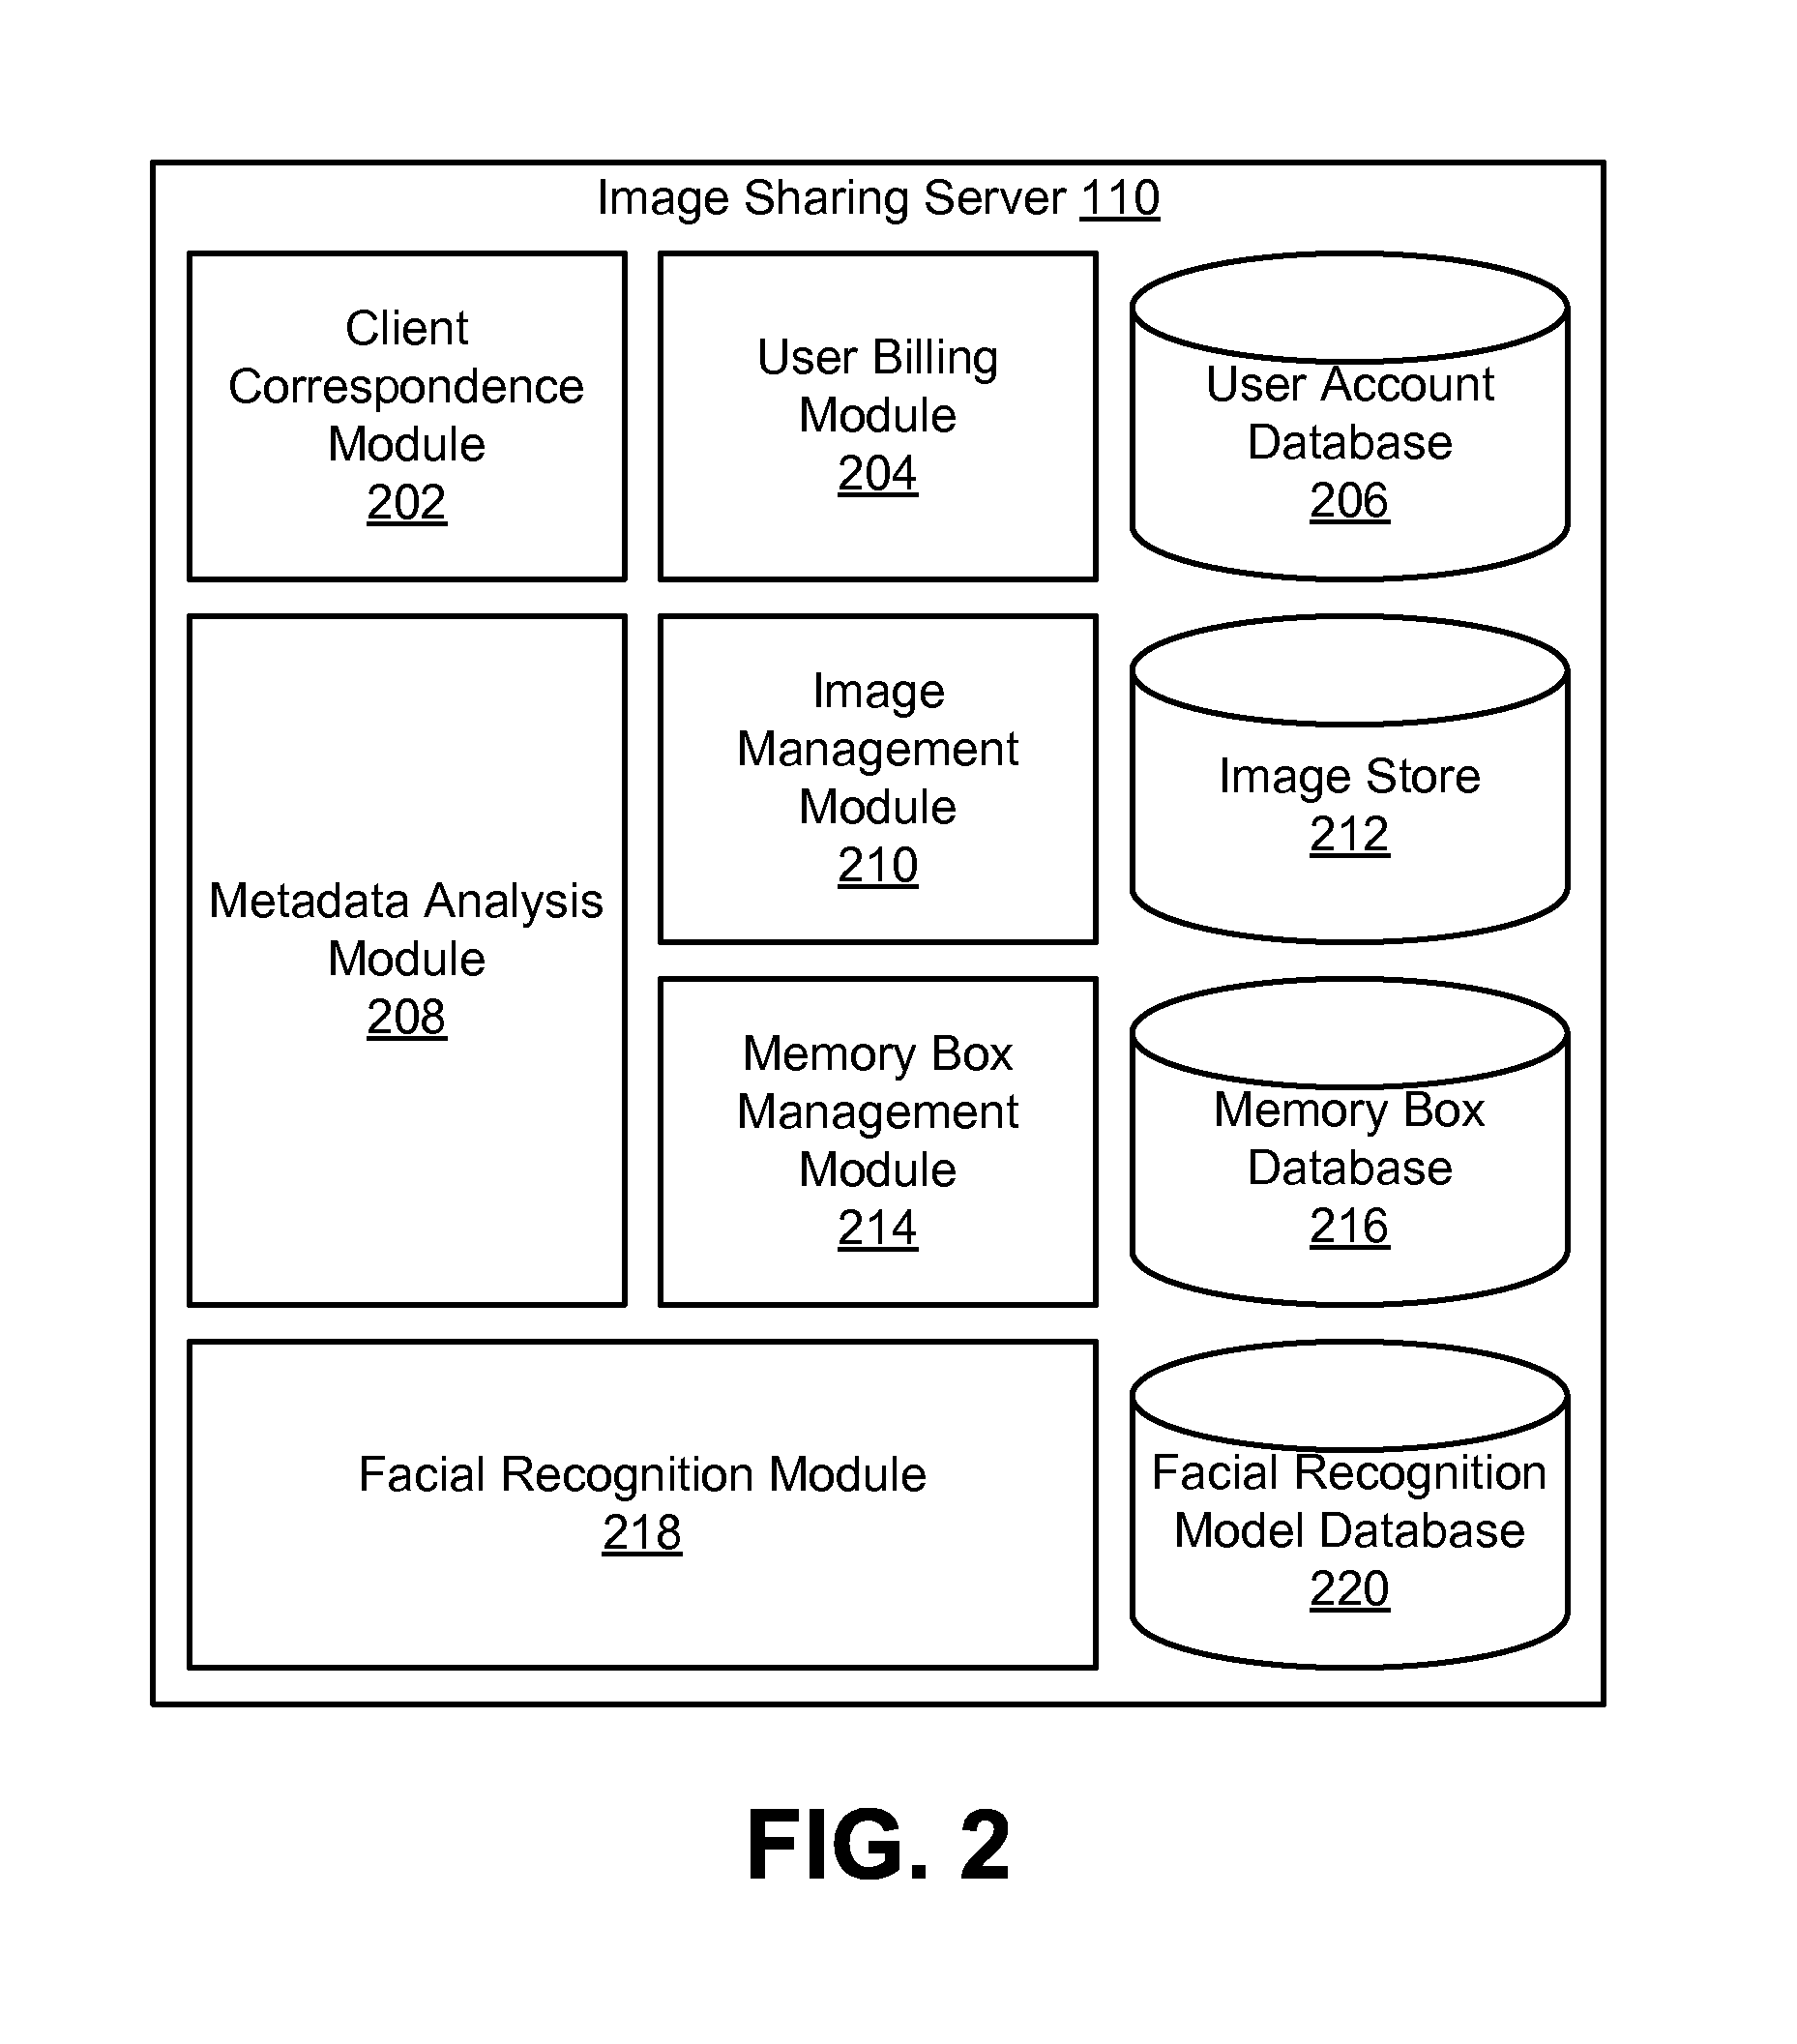 System and method for storing and sharing images